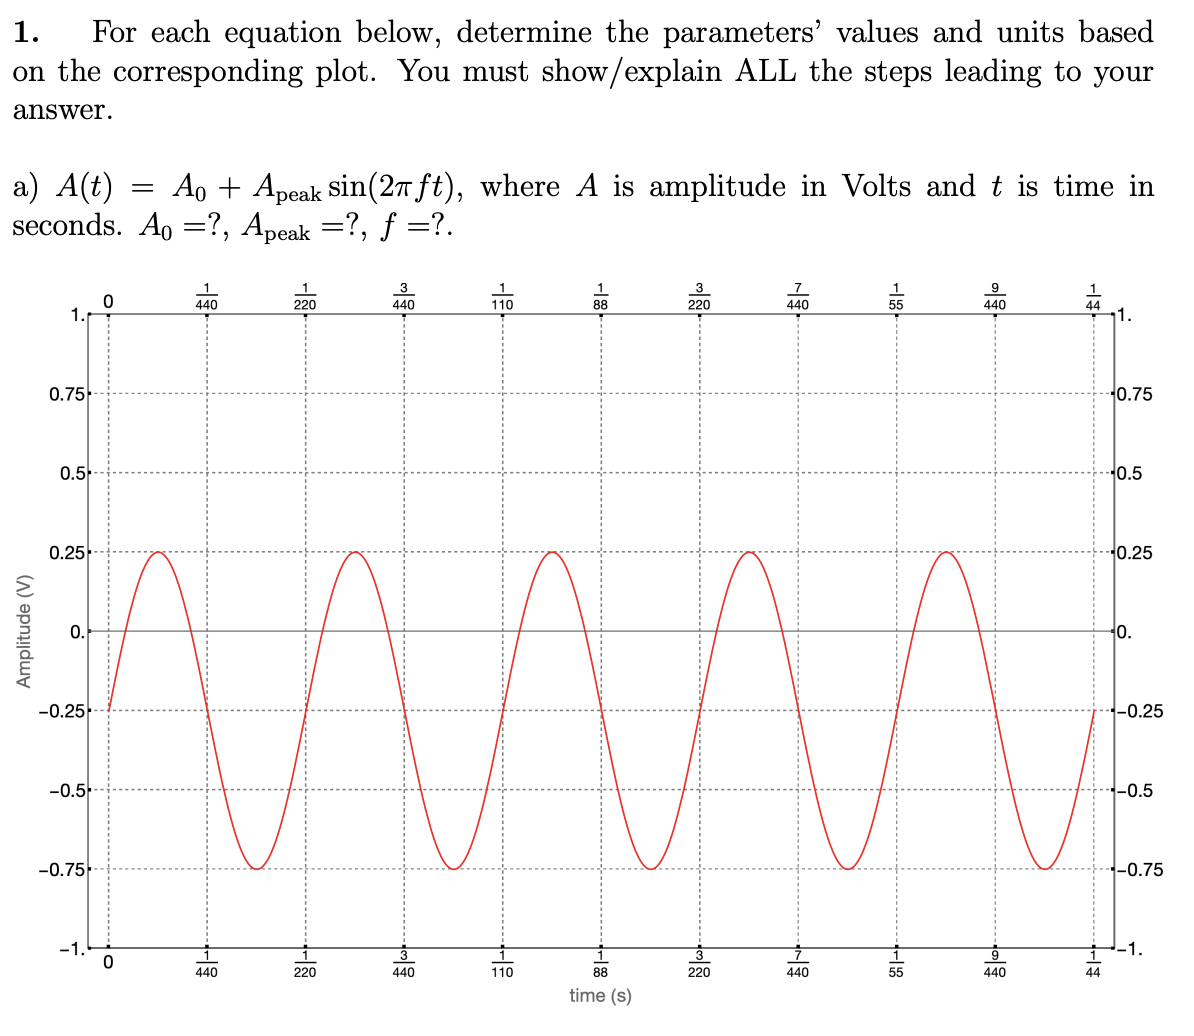 1.
For each equation below, determine the parameters' values and units based
on the corresponding plot. You must show/explain ALL the steps leading to your
answer.
a) A(t)
seconds. A, =?, Apeak =?, ƒ =?.
Ao + Apeak sin(27 ft), where A is amplitude in Volts and t is time in
440
220
440
110
220
440
440
1.
1.
0.75
0.75
0.5
0.5
0.25
40.25
0.
0.
-0.25
-0.25
-0.5
-0.5
-0.75
--0.75
-1.
9
-1.
440
220
440
110
88
220
440
55
440
44
time (s)
Amplitude (V)
-18
